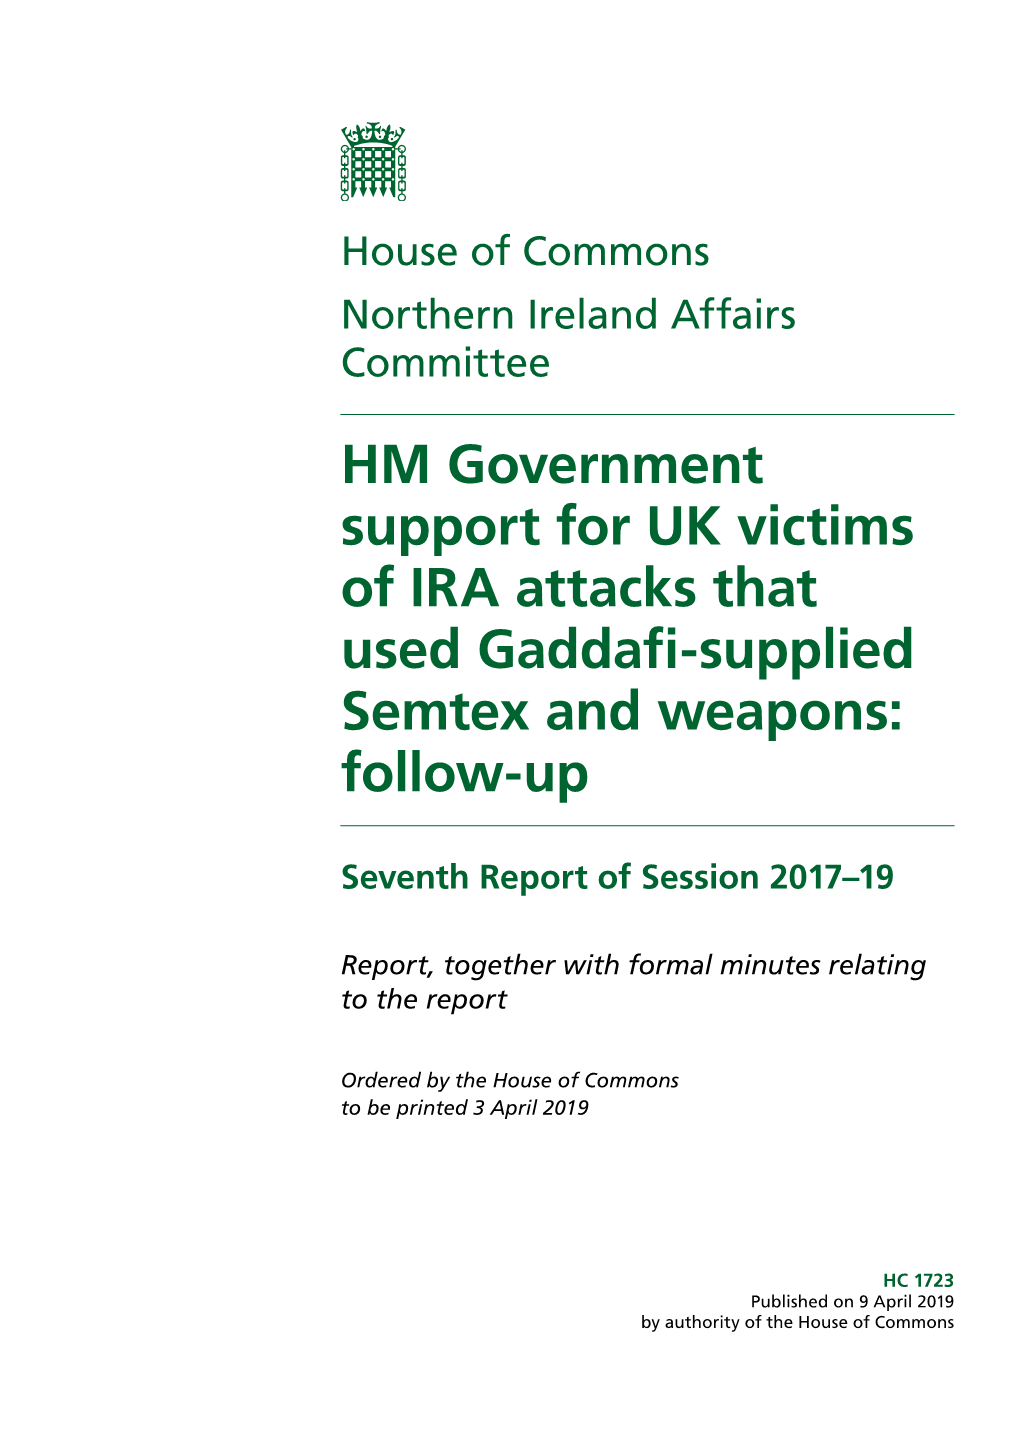 Support for UK Victims of IRA Attacks That Used Gaddafi-Supplied Semtex and Weapons: Follow-Up